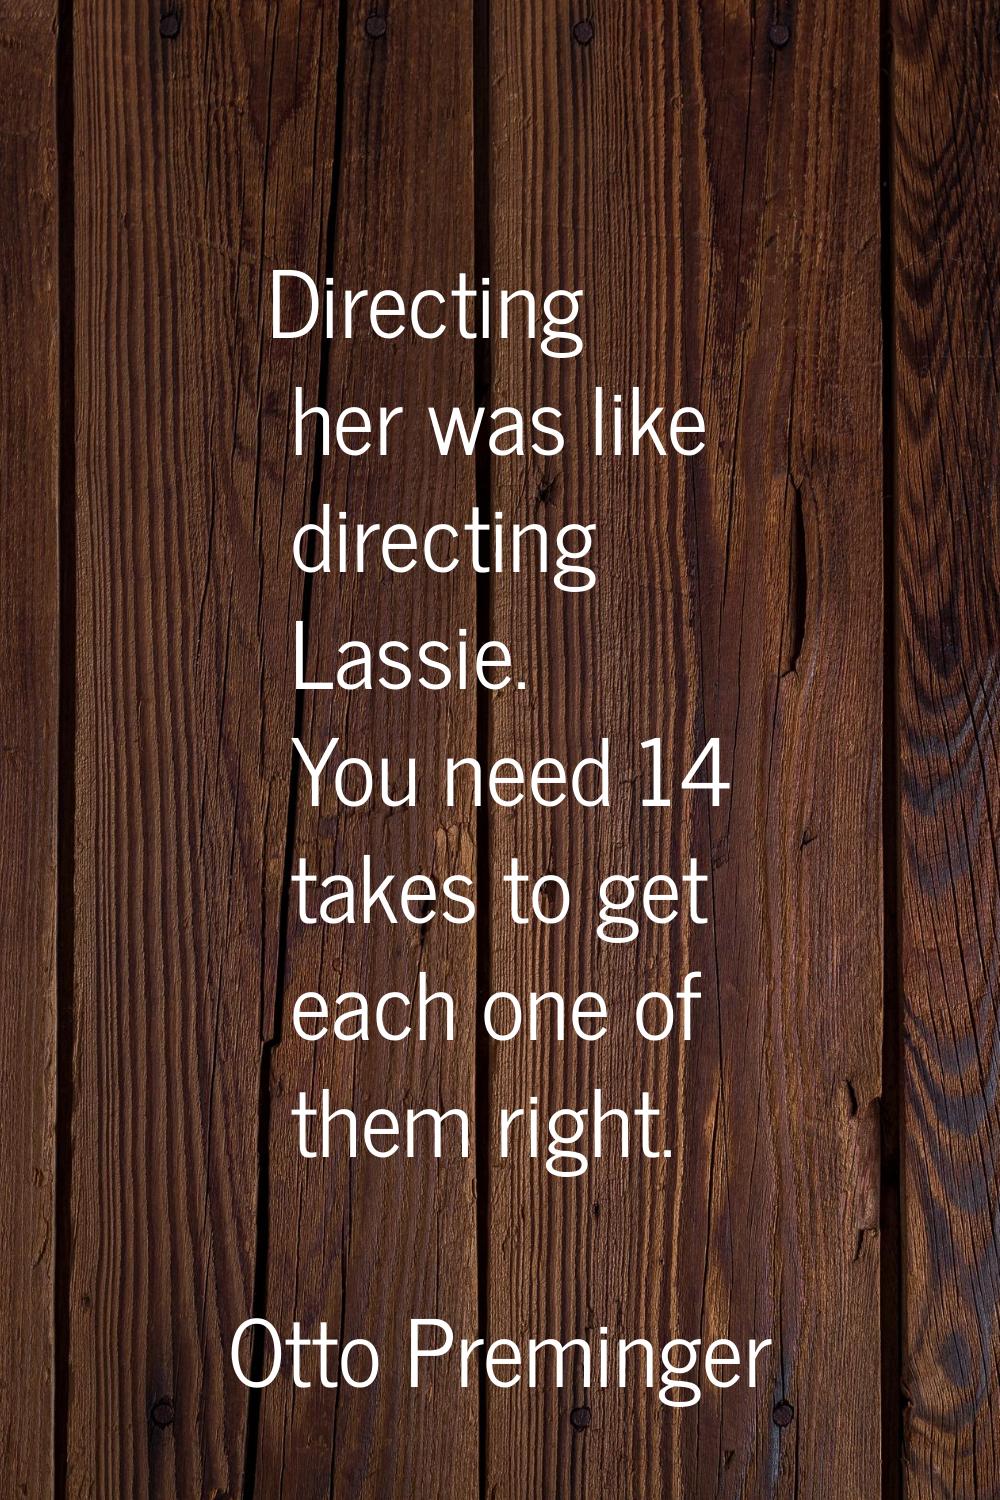 Directing her was like directing Lassie. You need 14 takes to get each one of them right.